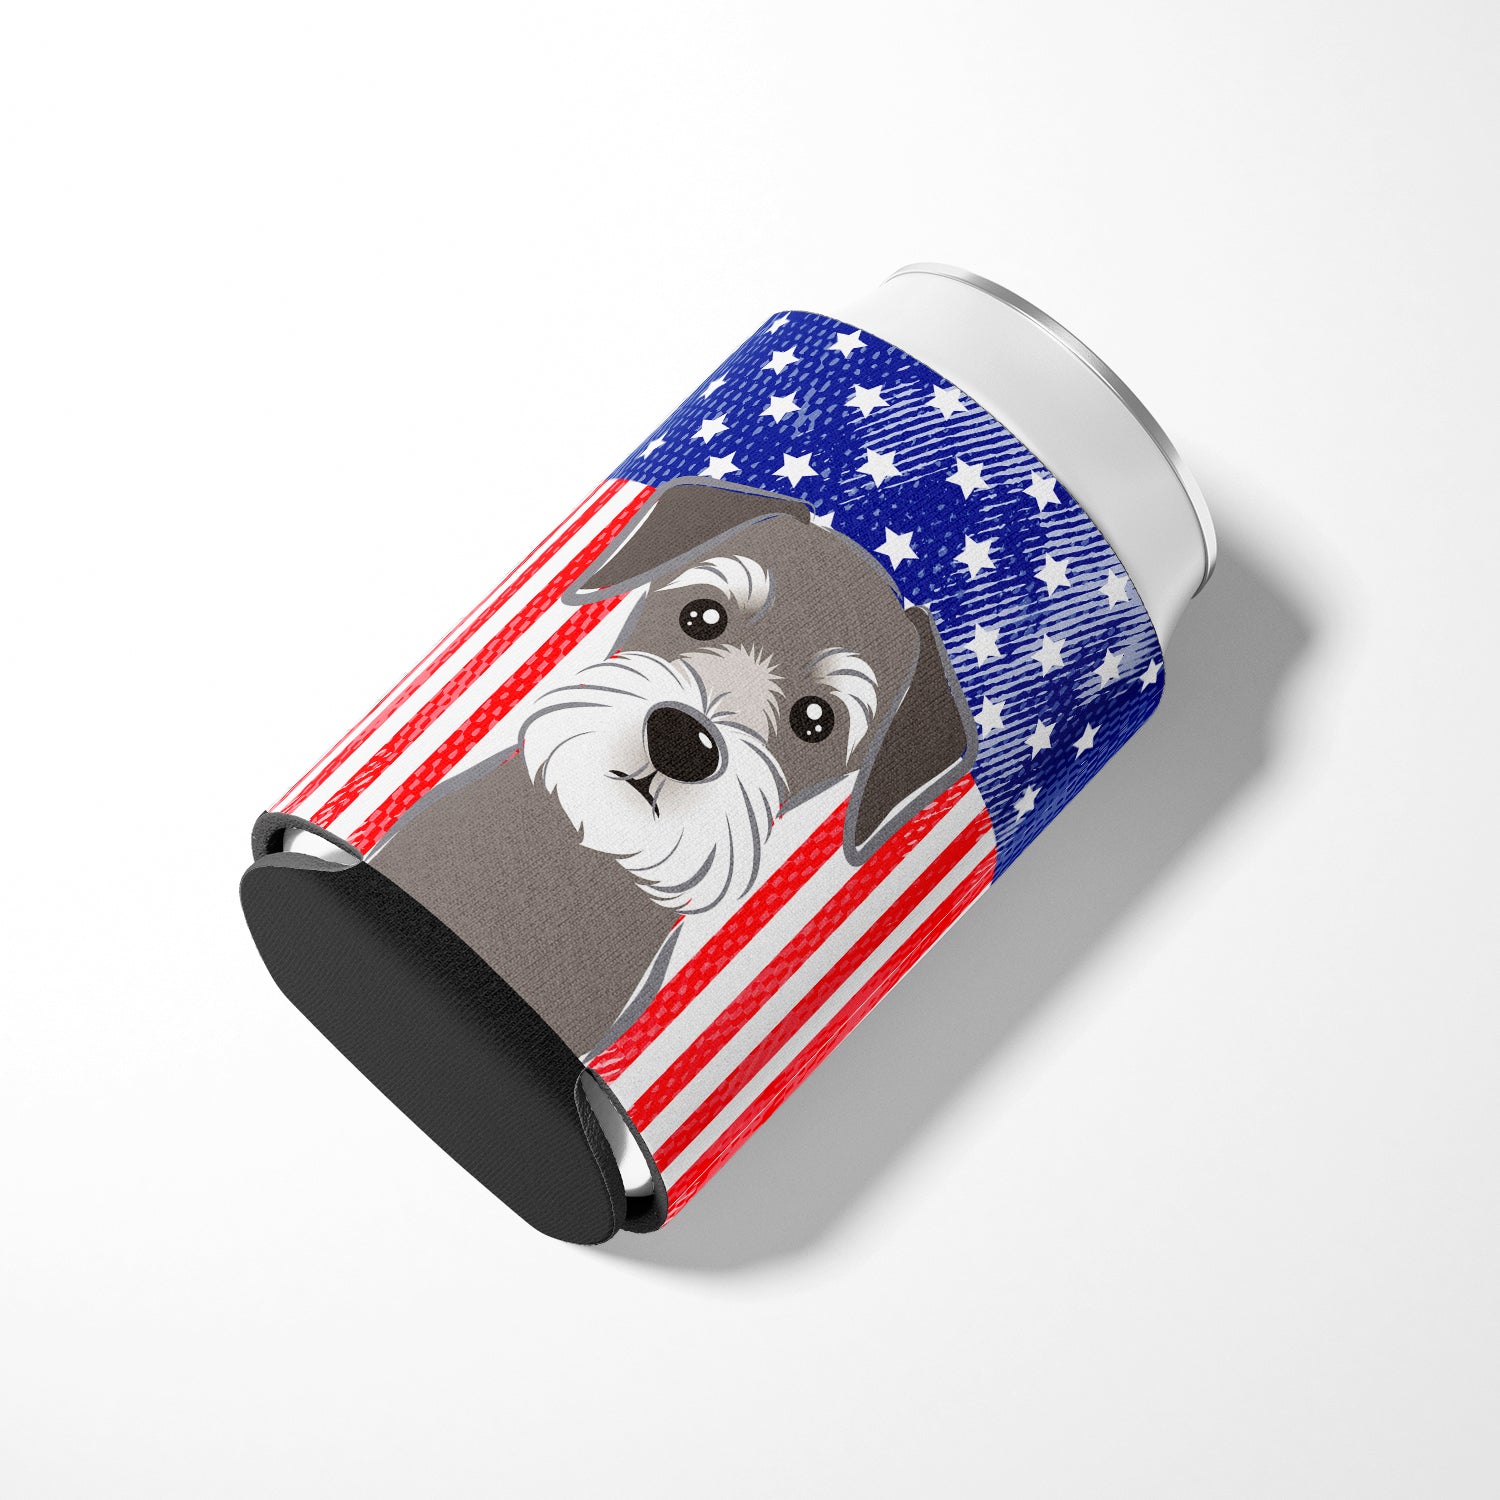 American Flag and Schnauzer Can or Bottle Hugger BB2136CC.